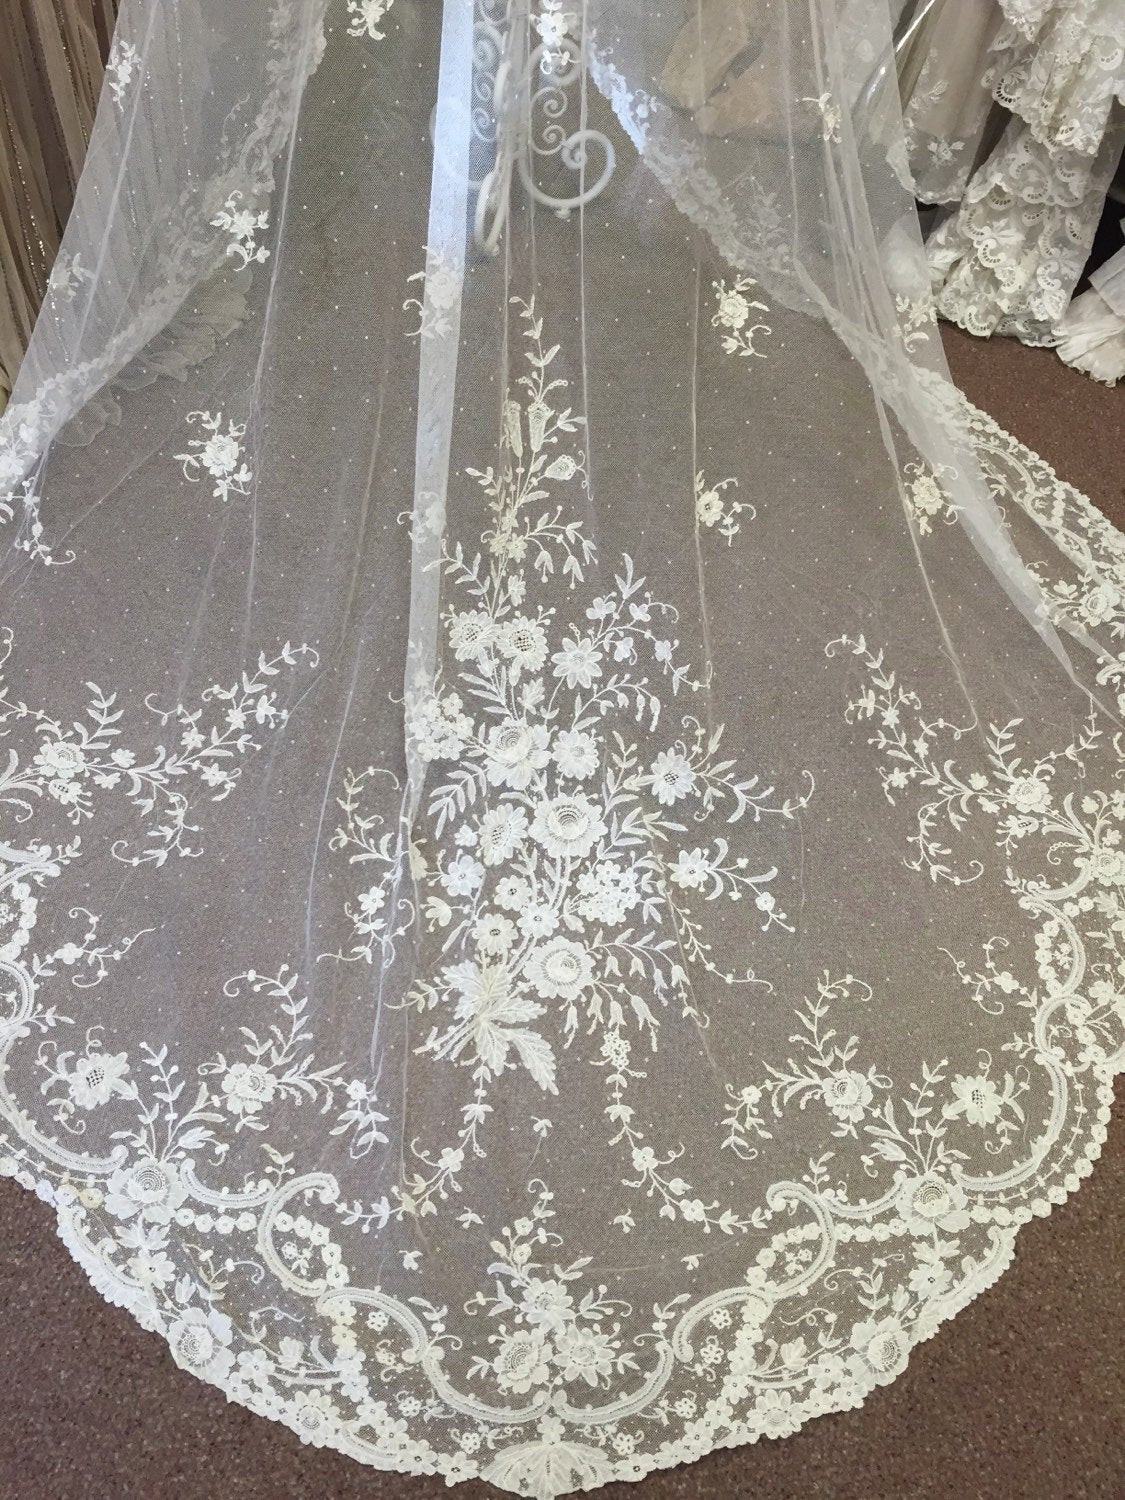 Wedding Veils With Lace
 Exquisite Antique Lace Wedding Veil by AntiqueLaceHeirlooms